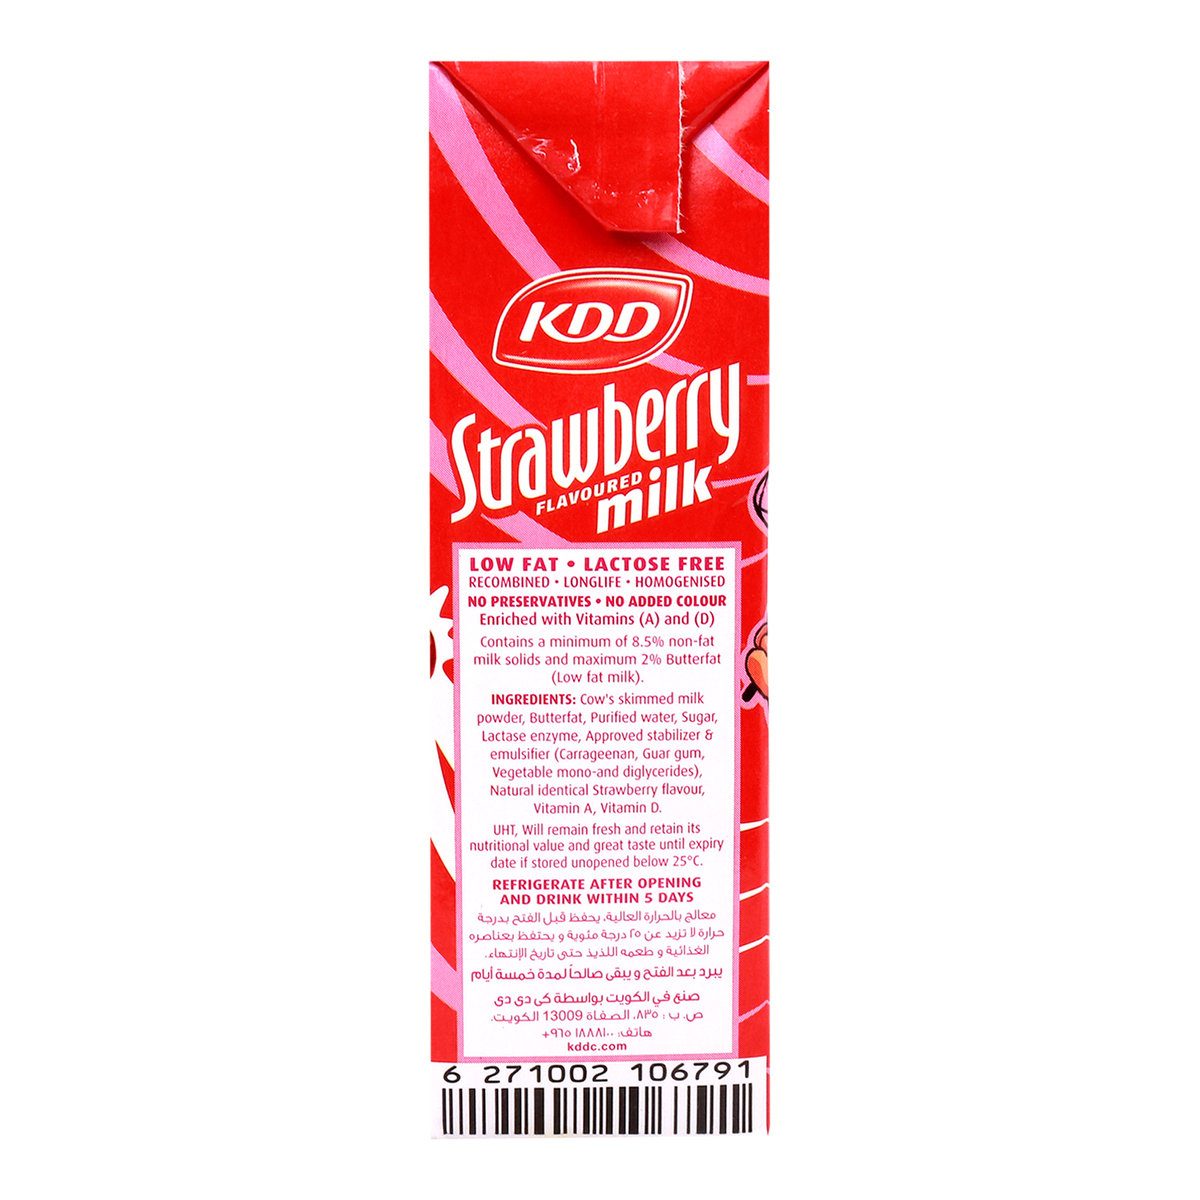 KDD Strawberry Flavoured Milk Lactose Free 180ml